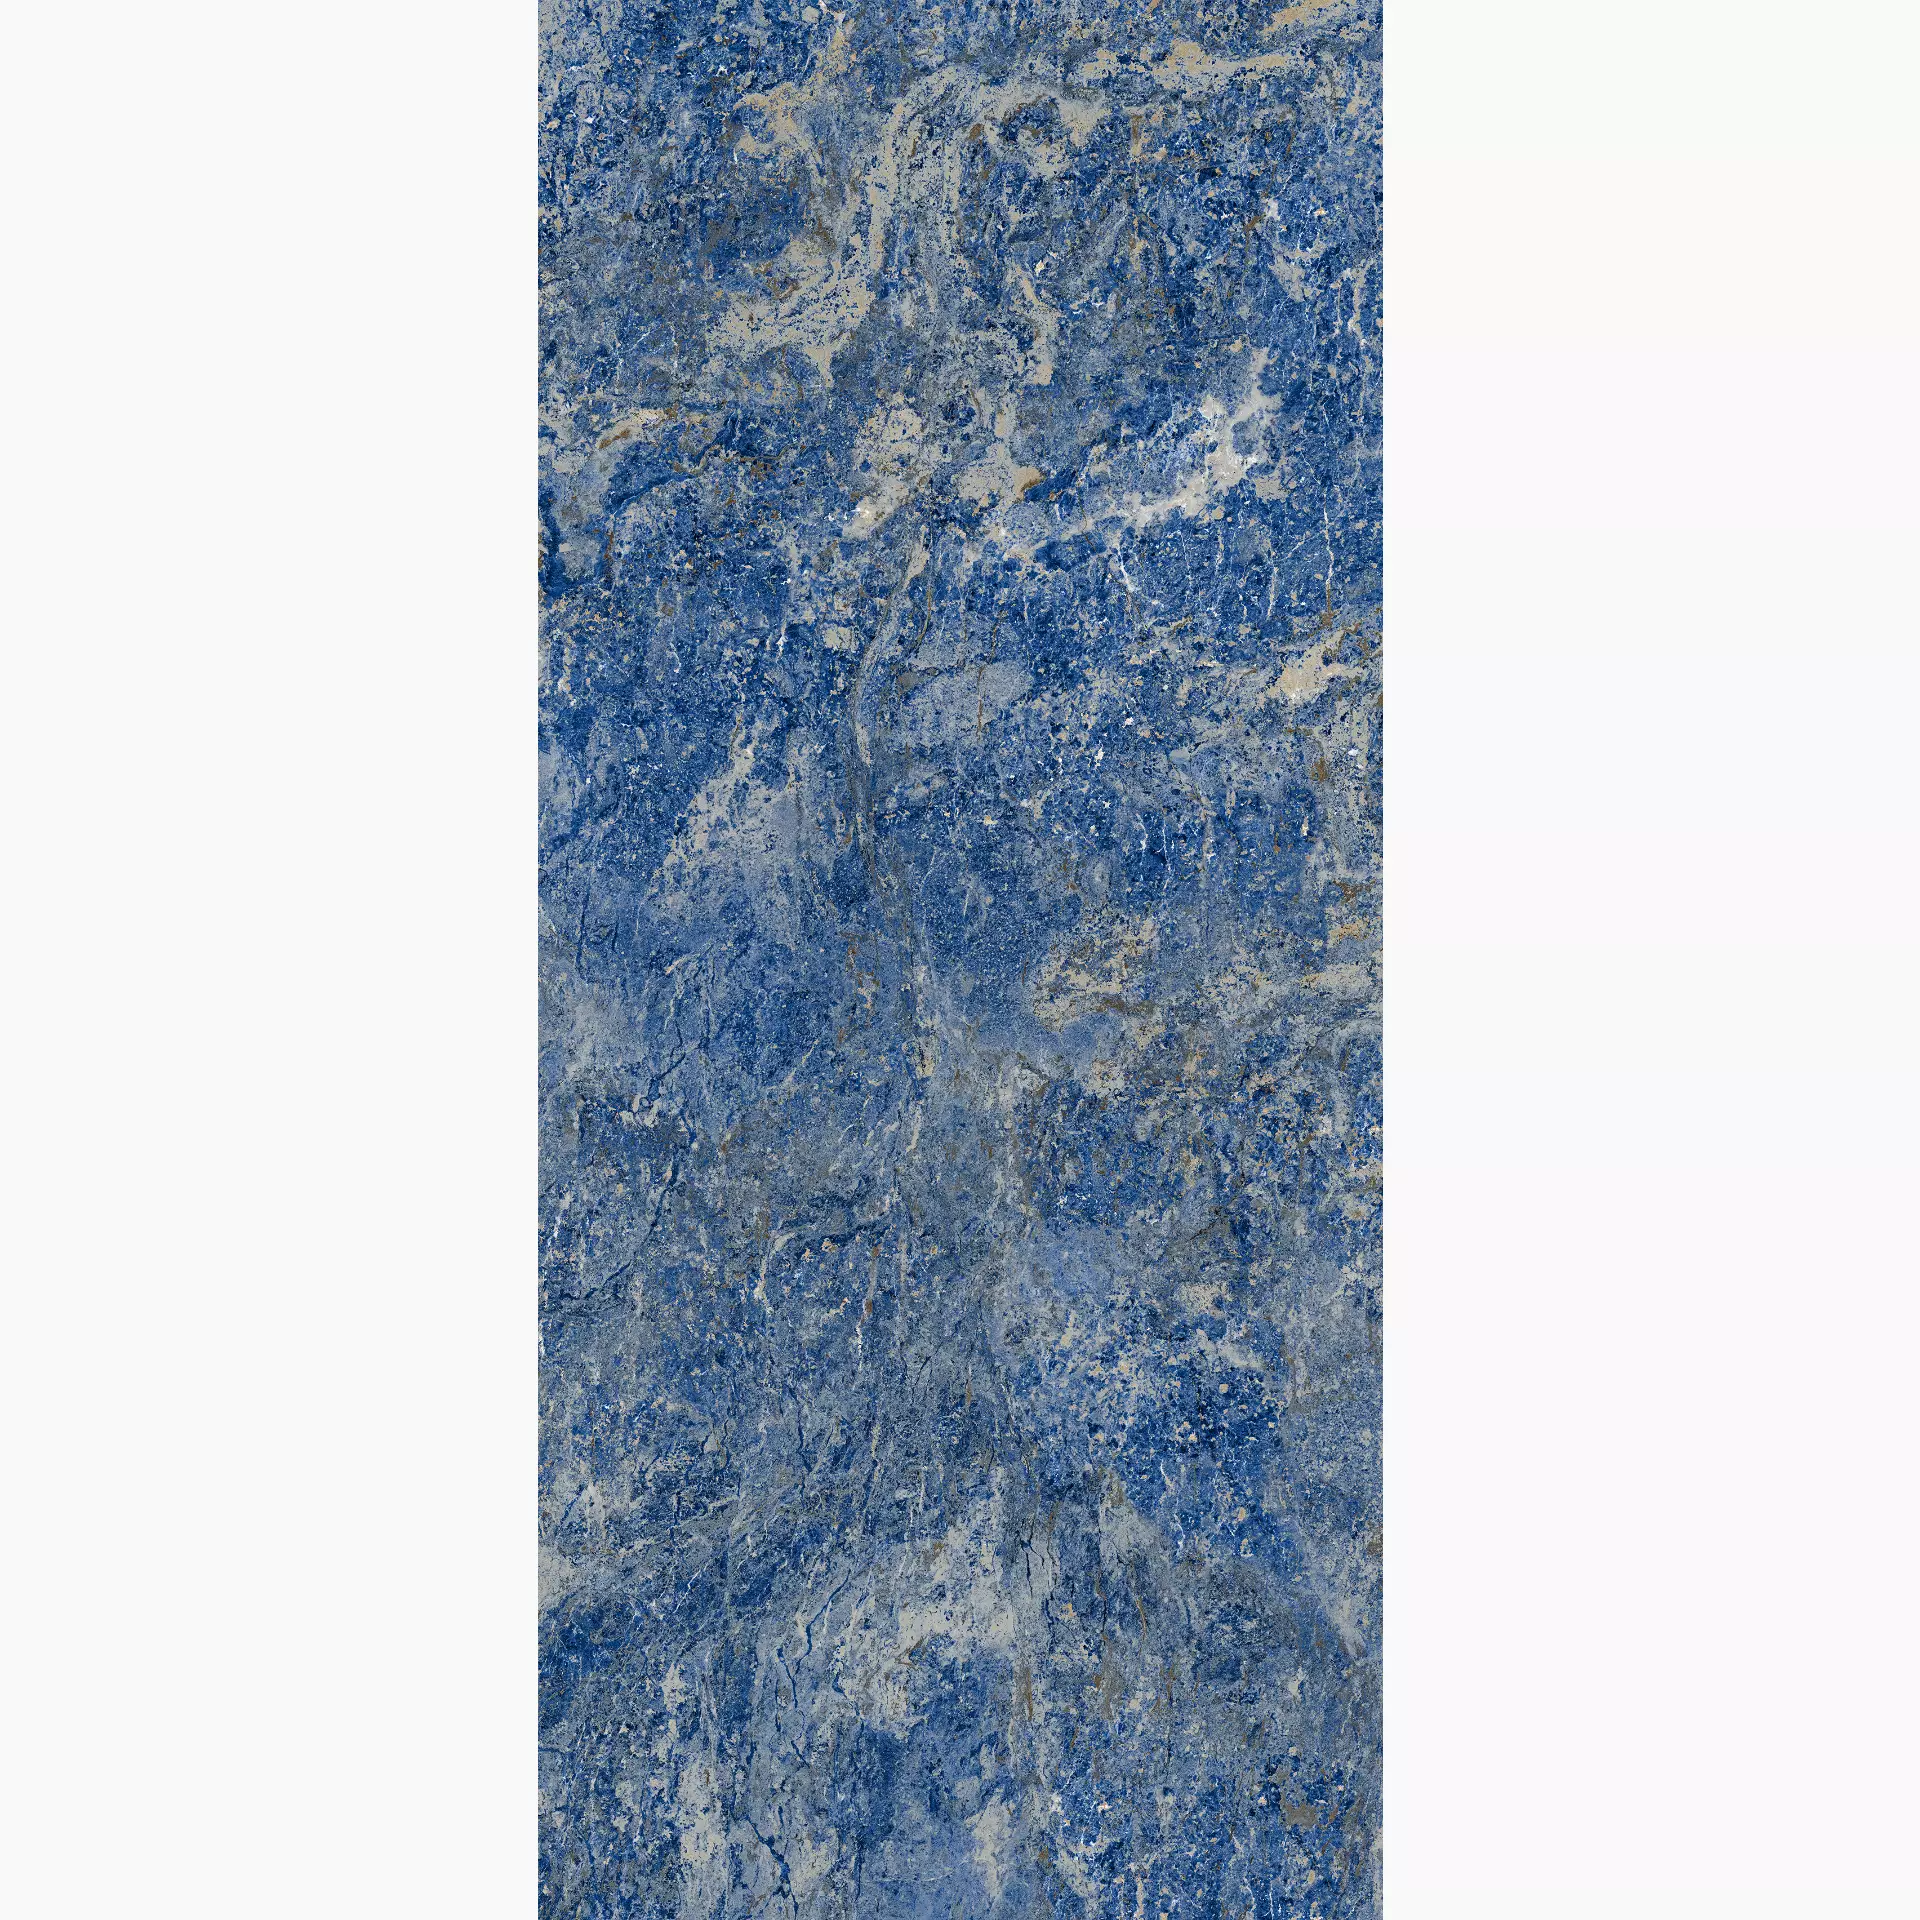 Fondovalle Infinito 2.0 Sodalite Blue Glossy INF1633 120x278cm rectified 6,5mm